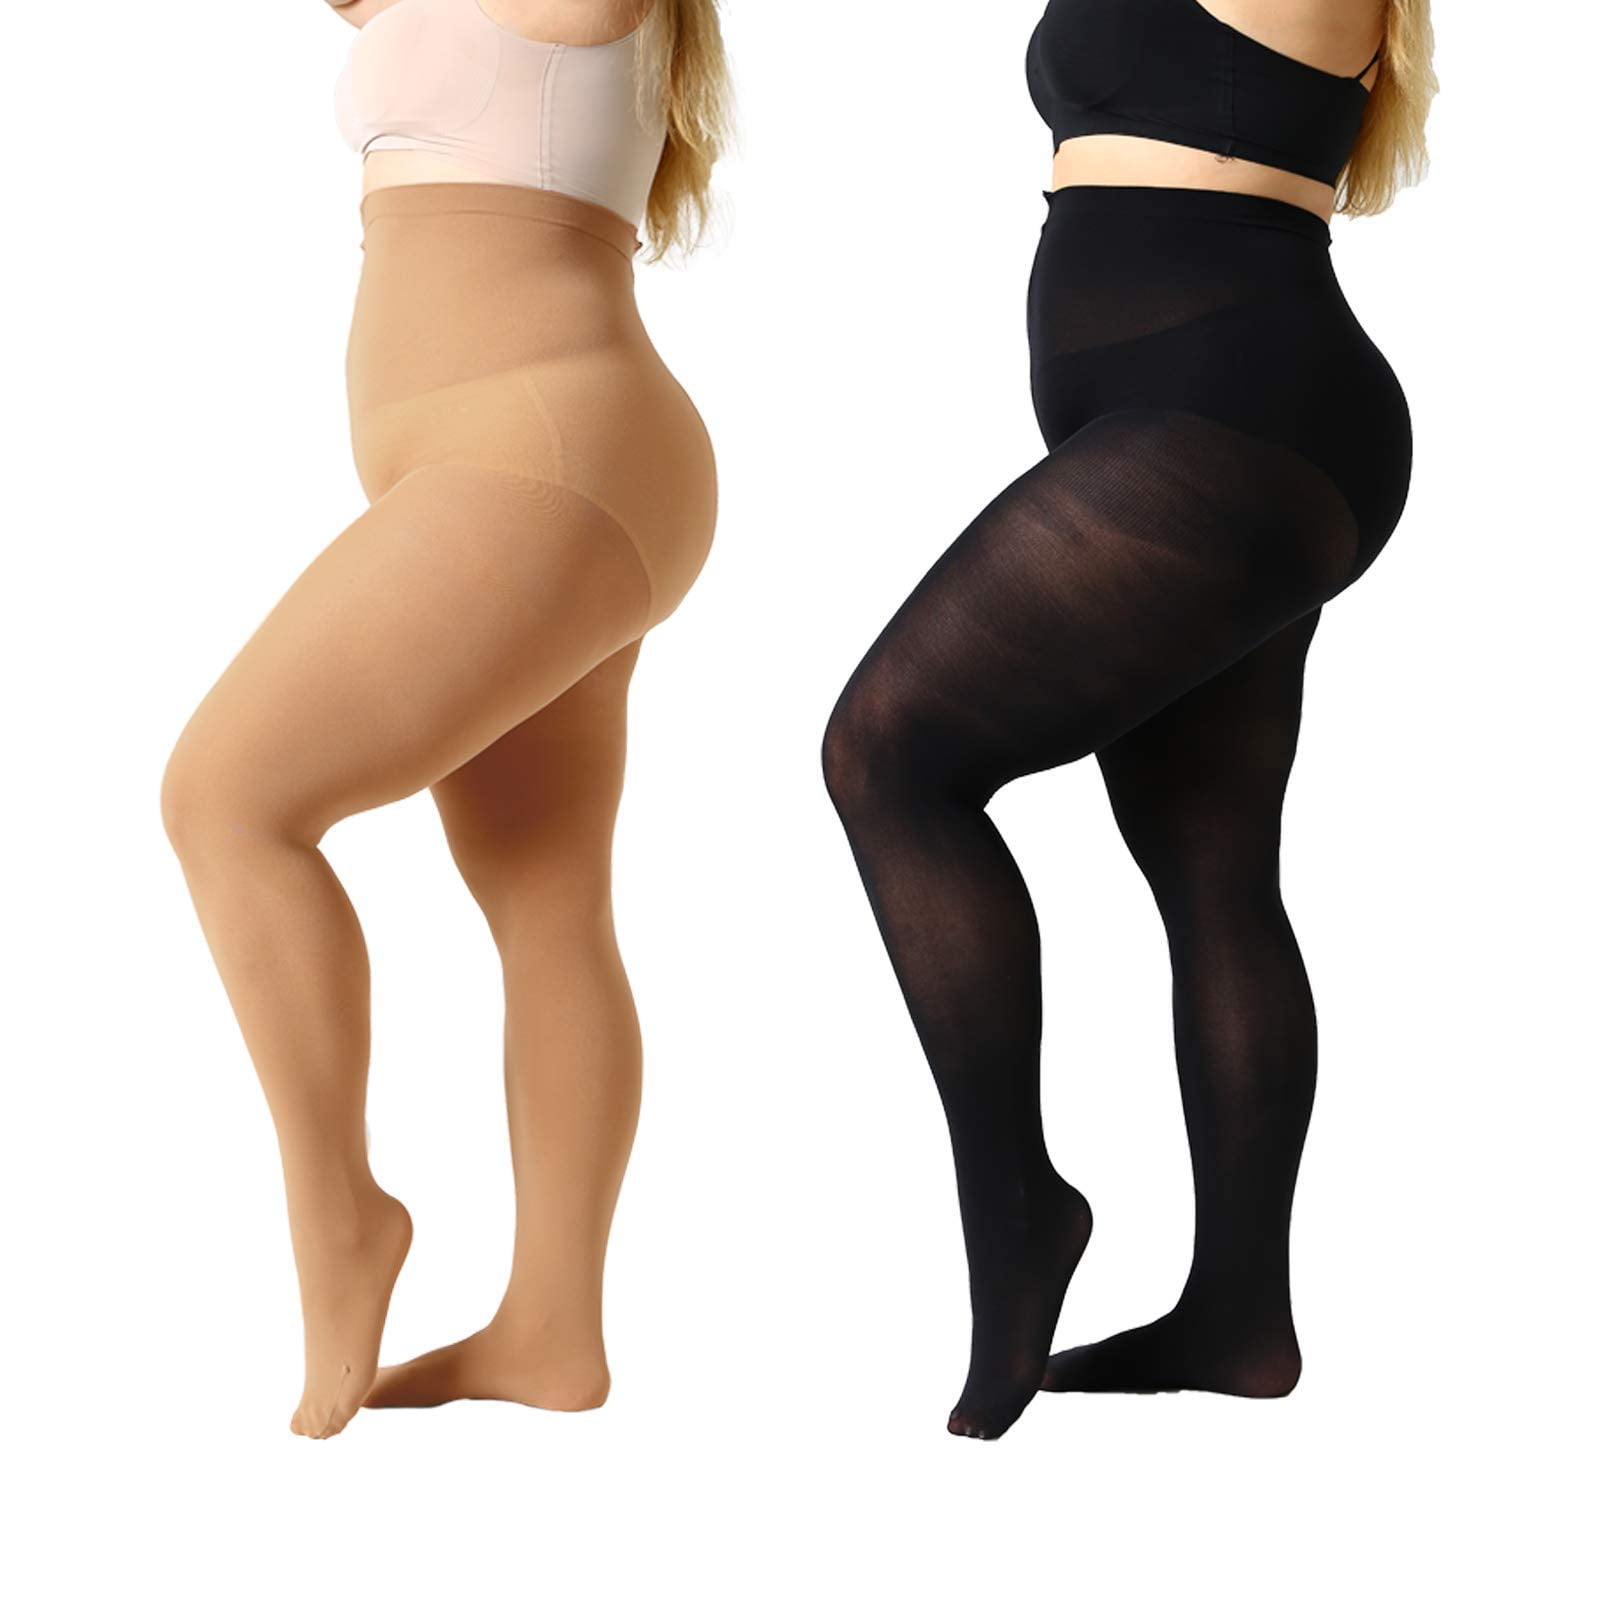 Yilanmy 2 Pairs Plus Size Tights for Women 70D Semi Opaque Control Top  Pantyhose Queen Size High Waist Stockings at  Women's Clothing store